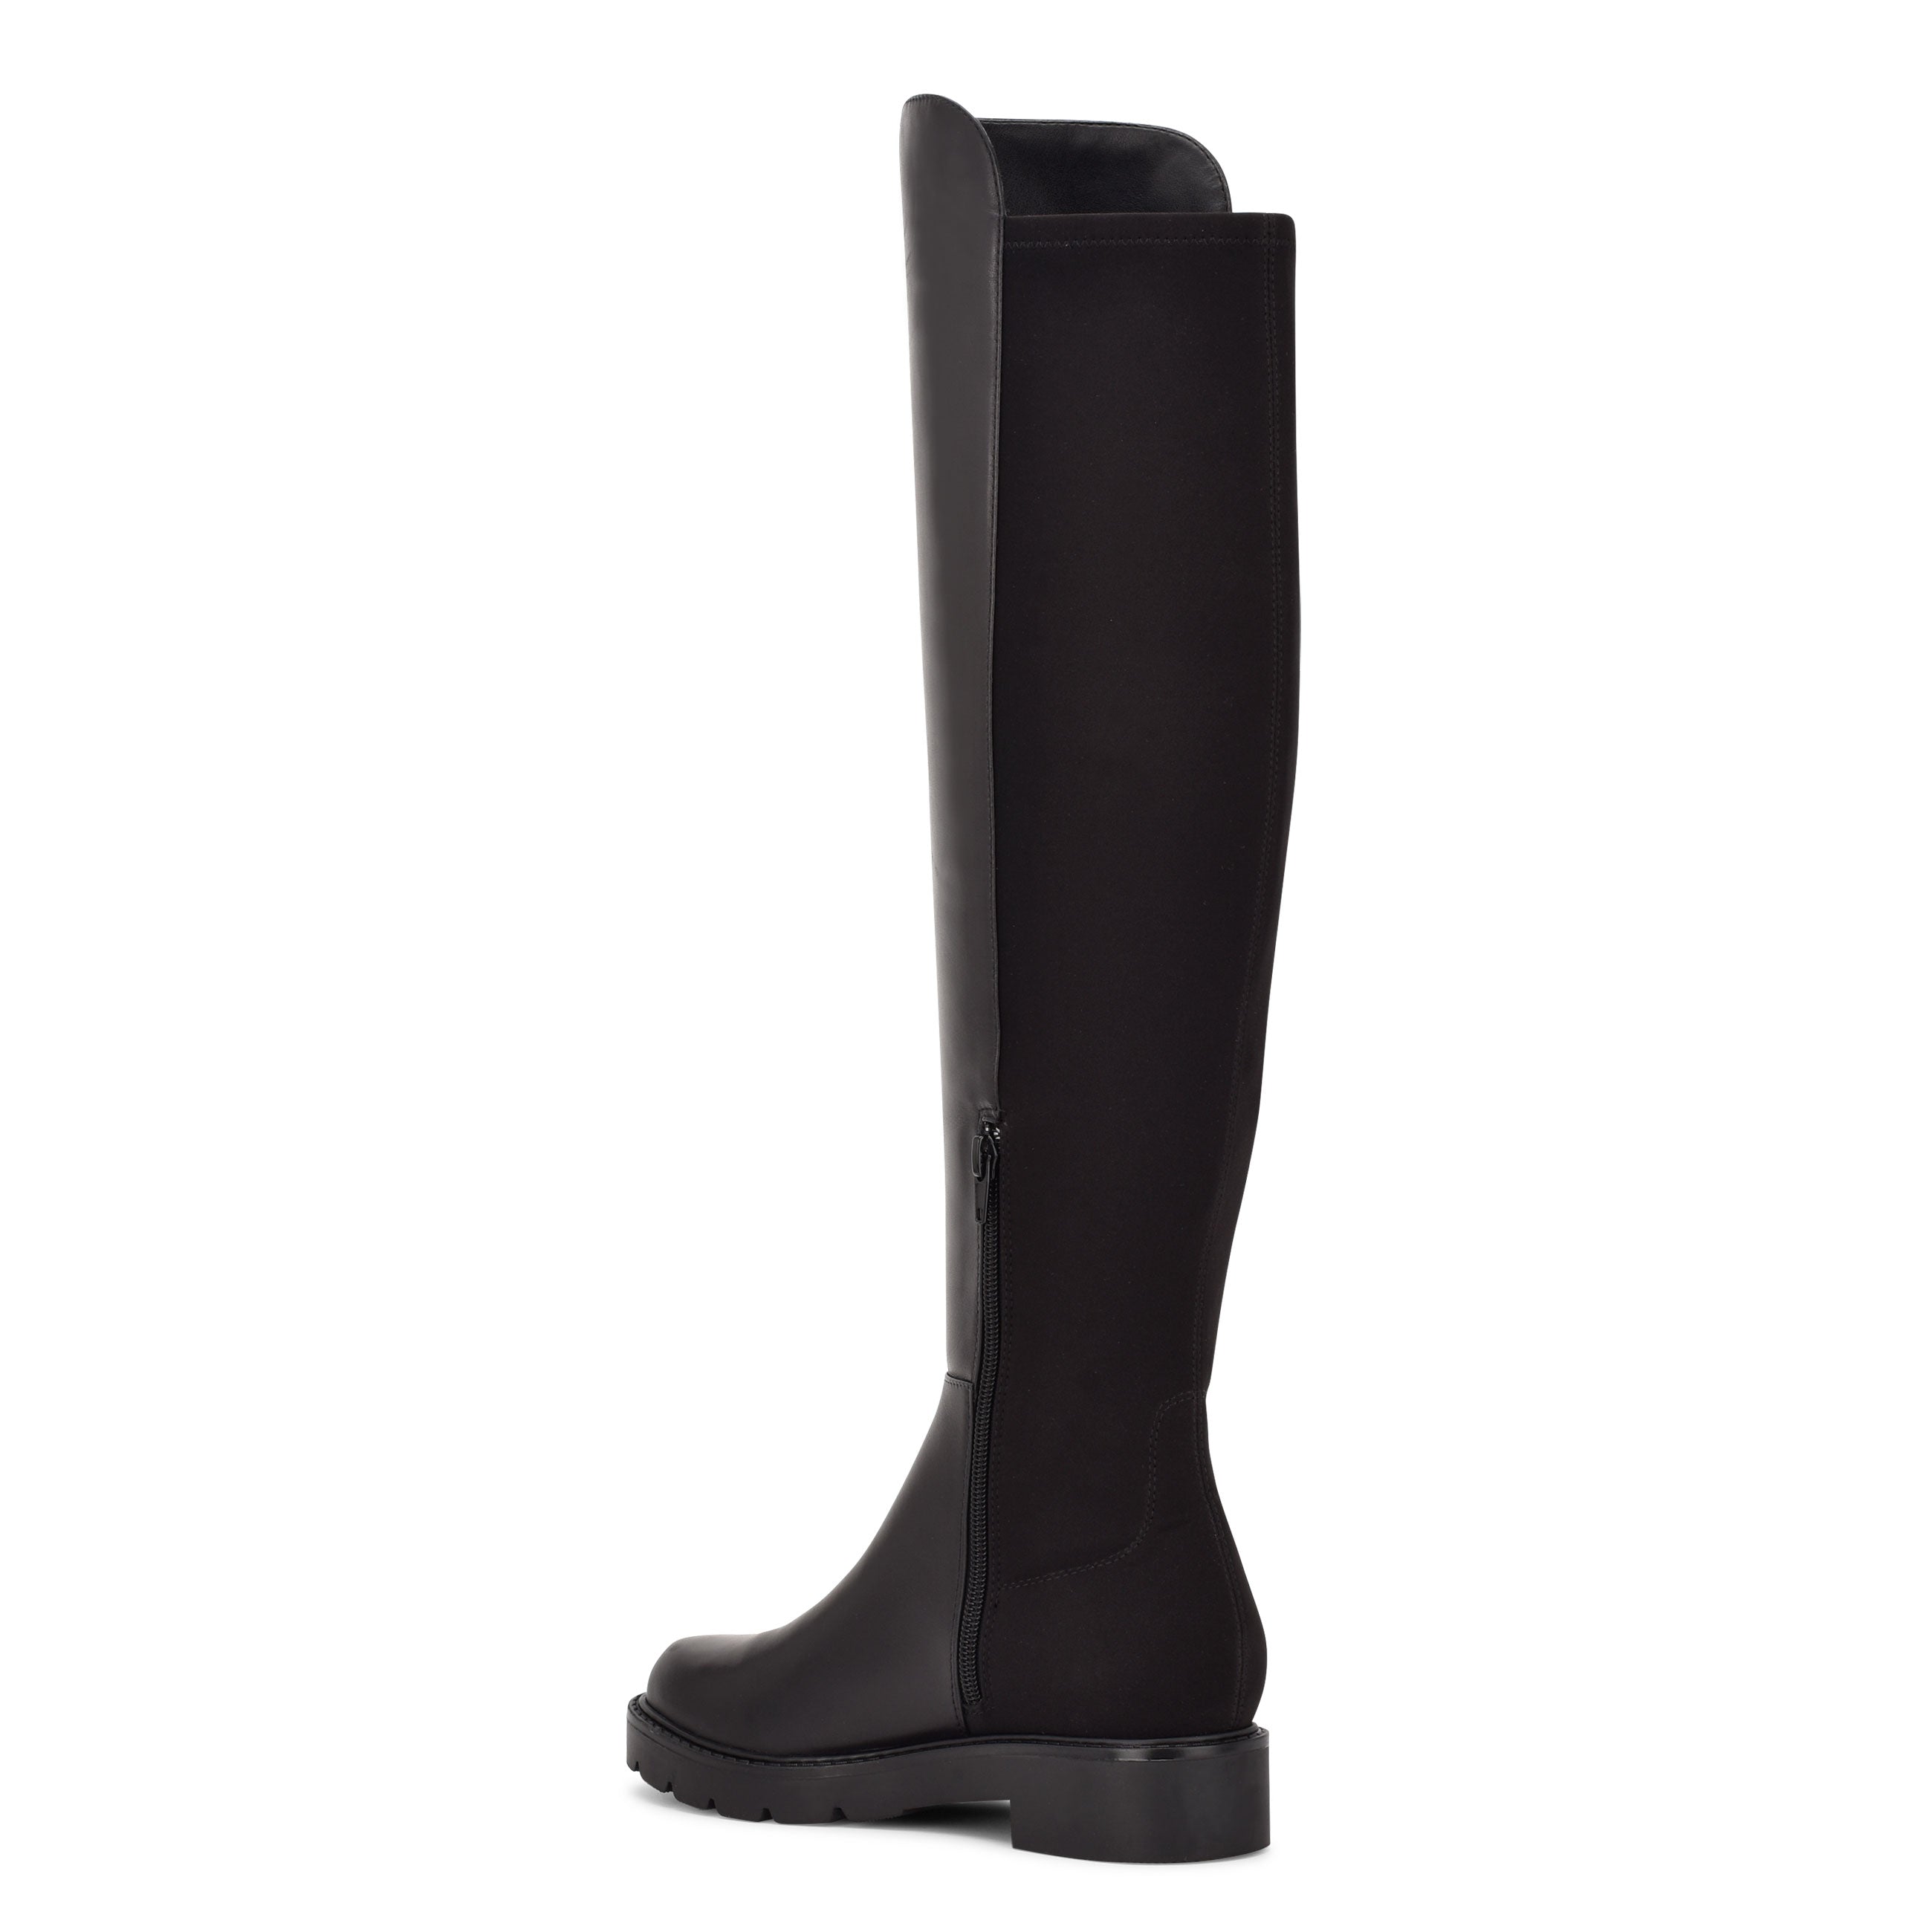 Journey + Crew Comfort Sole Strap Riding Boot